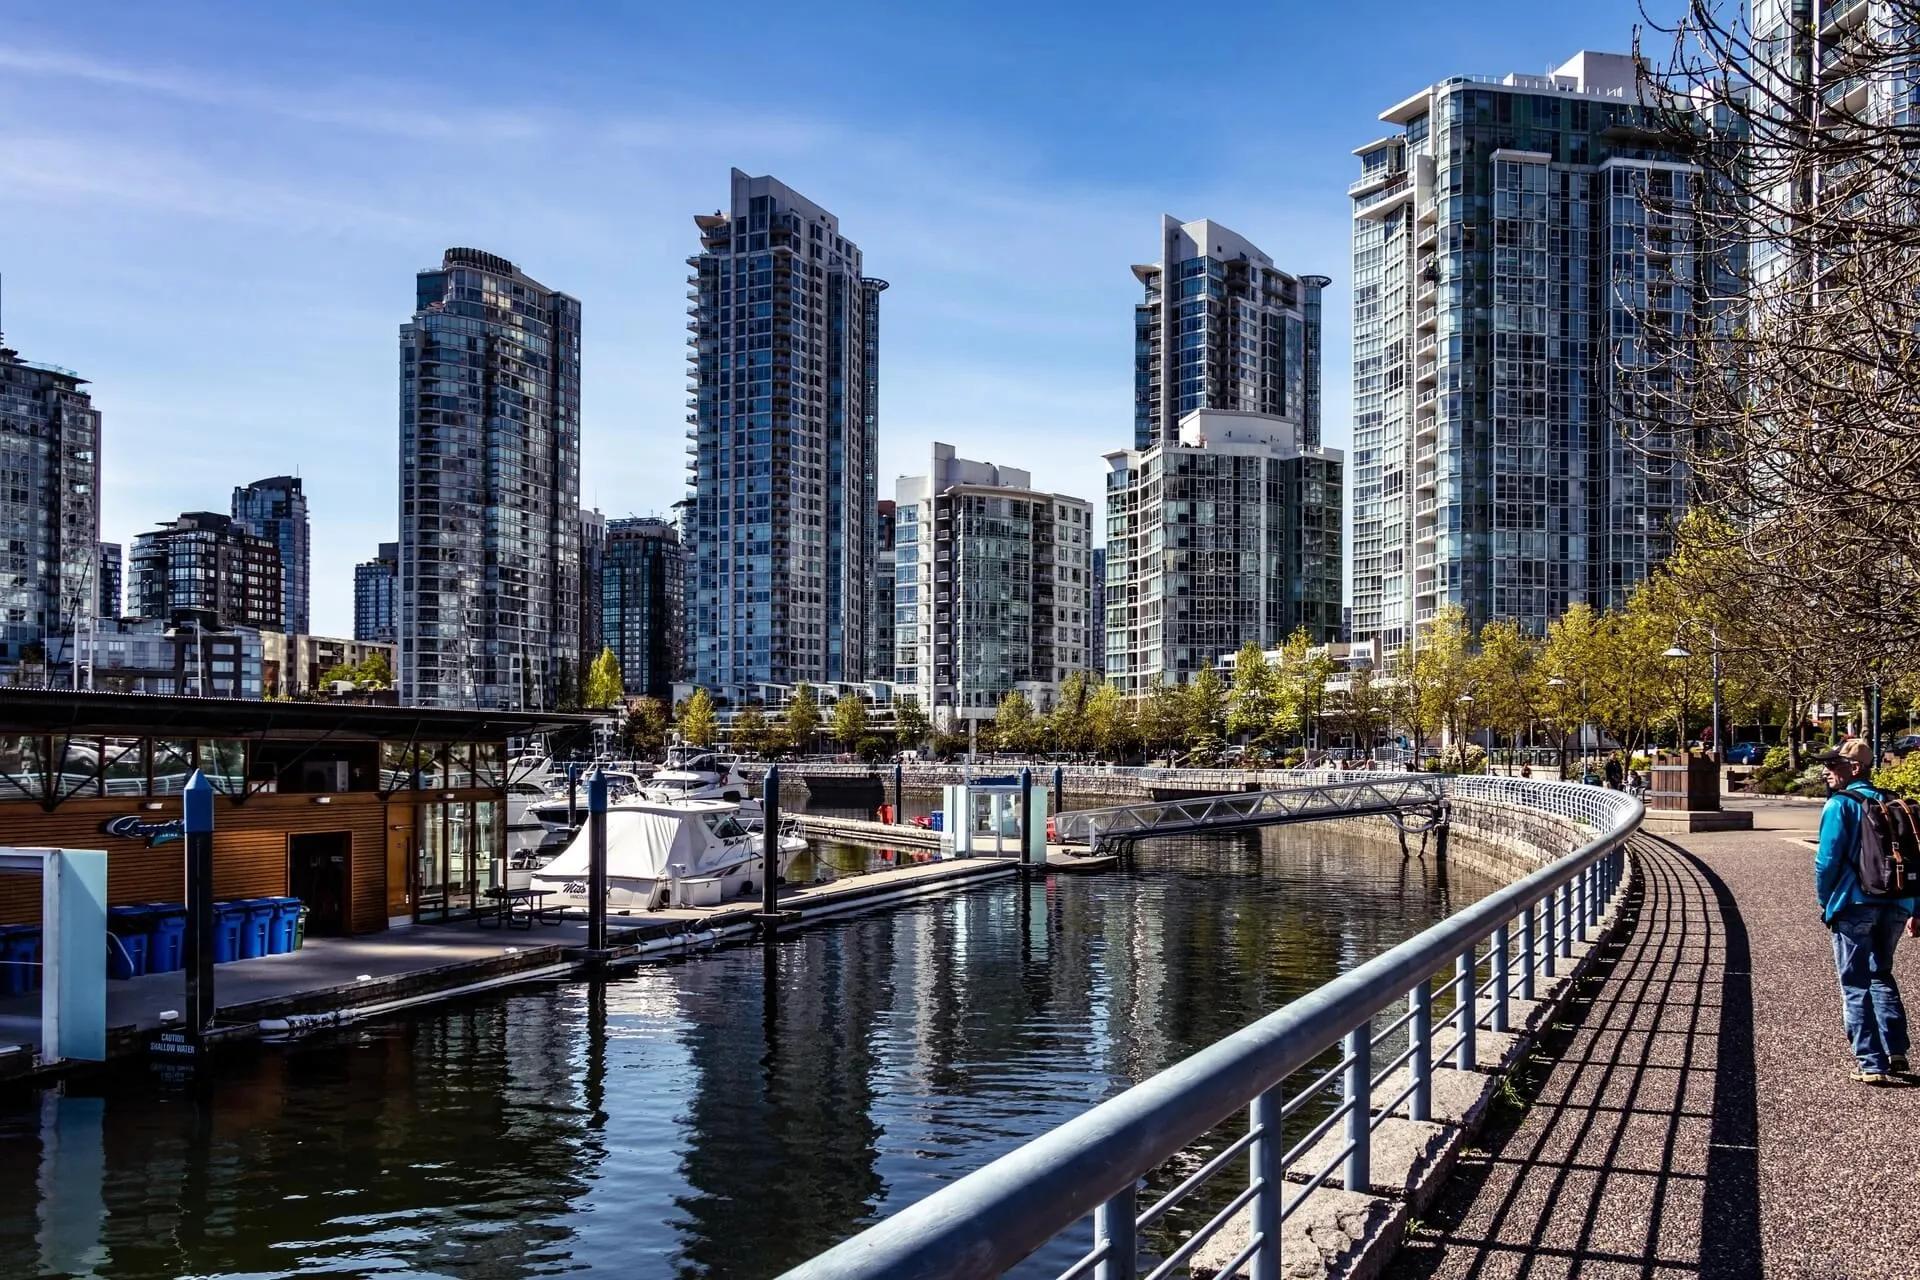 Presale Condo Market Turning to be Favourable in Metro Vancouver